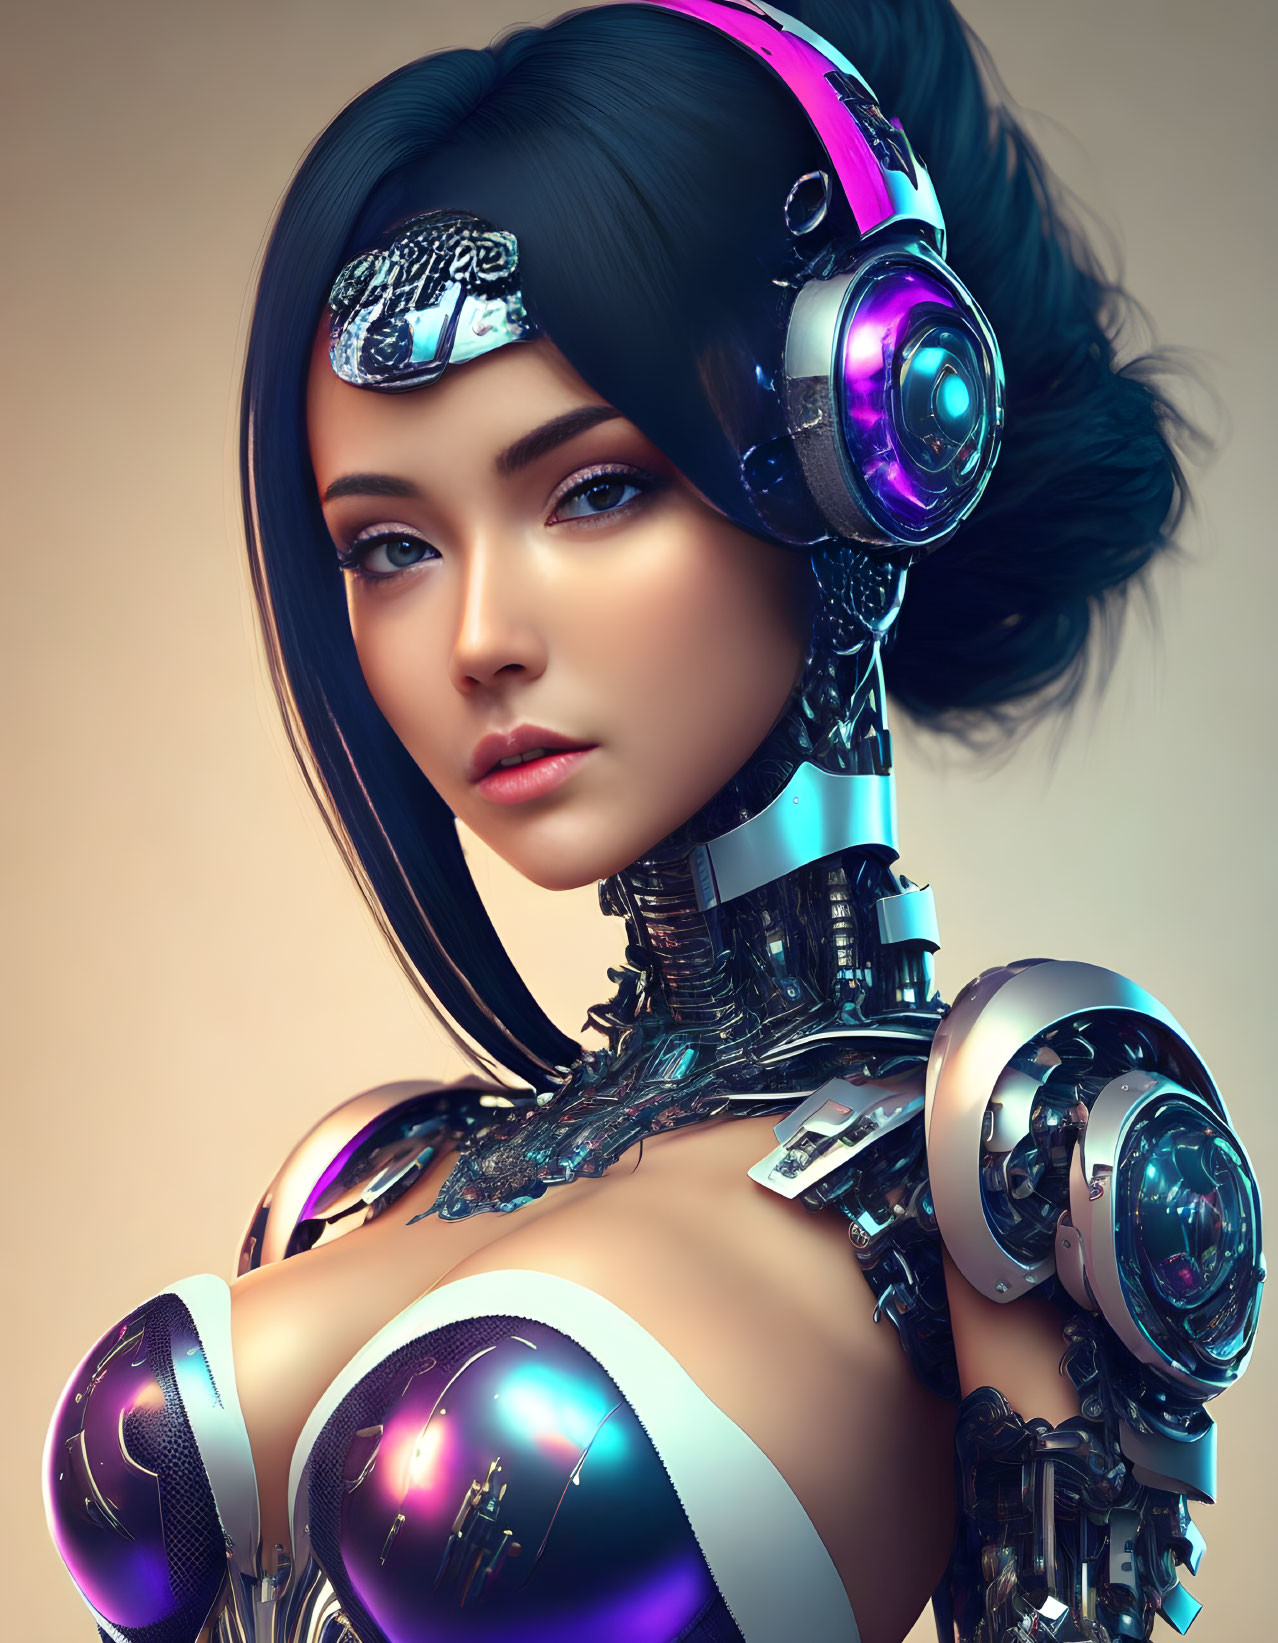 Female android digital art with intricate mechanical neck and shoulders and futuristic headphones on tan background